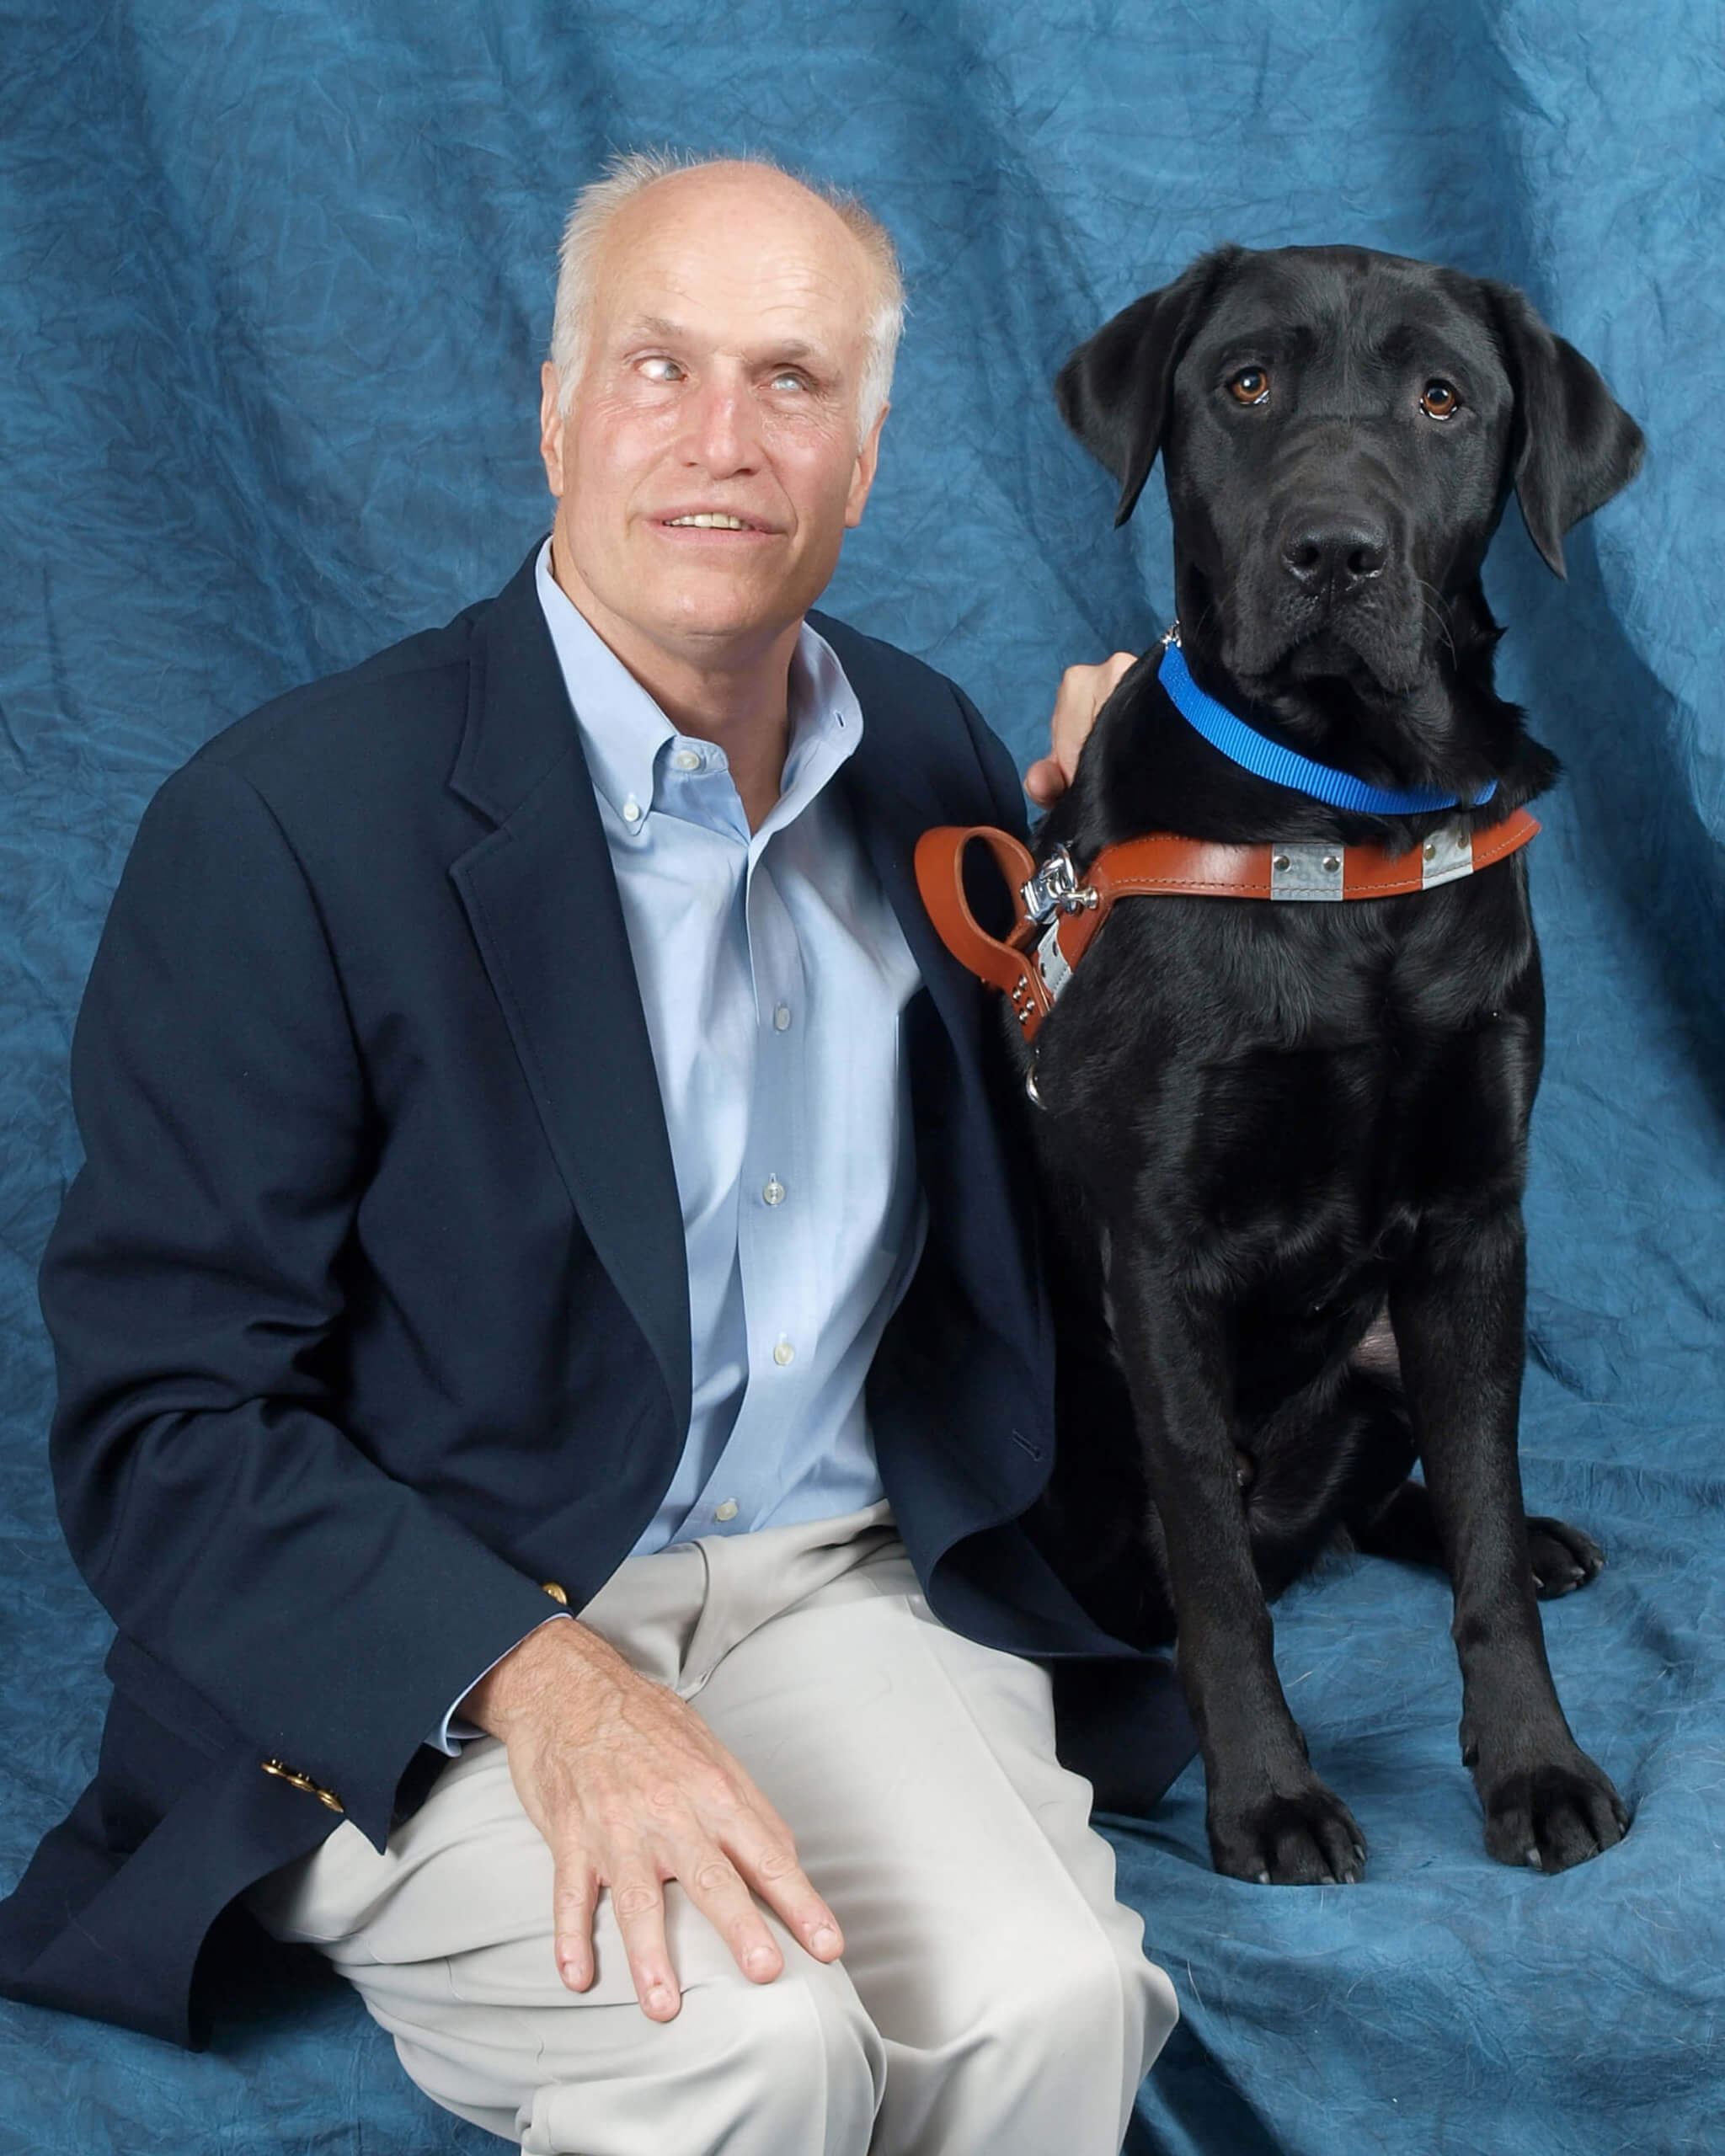 Curt Landroop with his Guiding Eyes guide dog Windsor